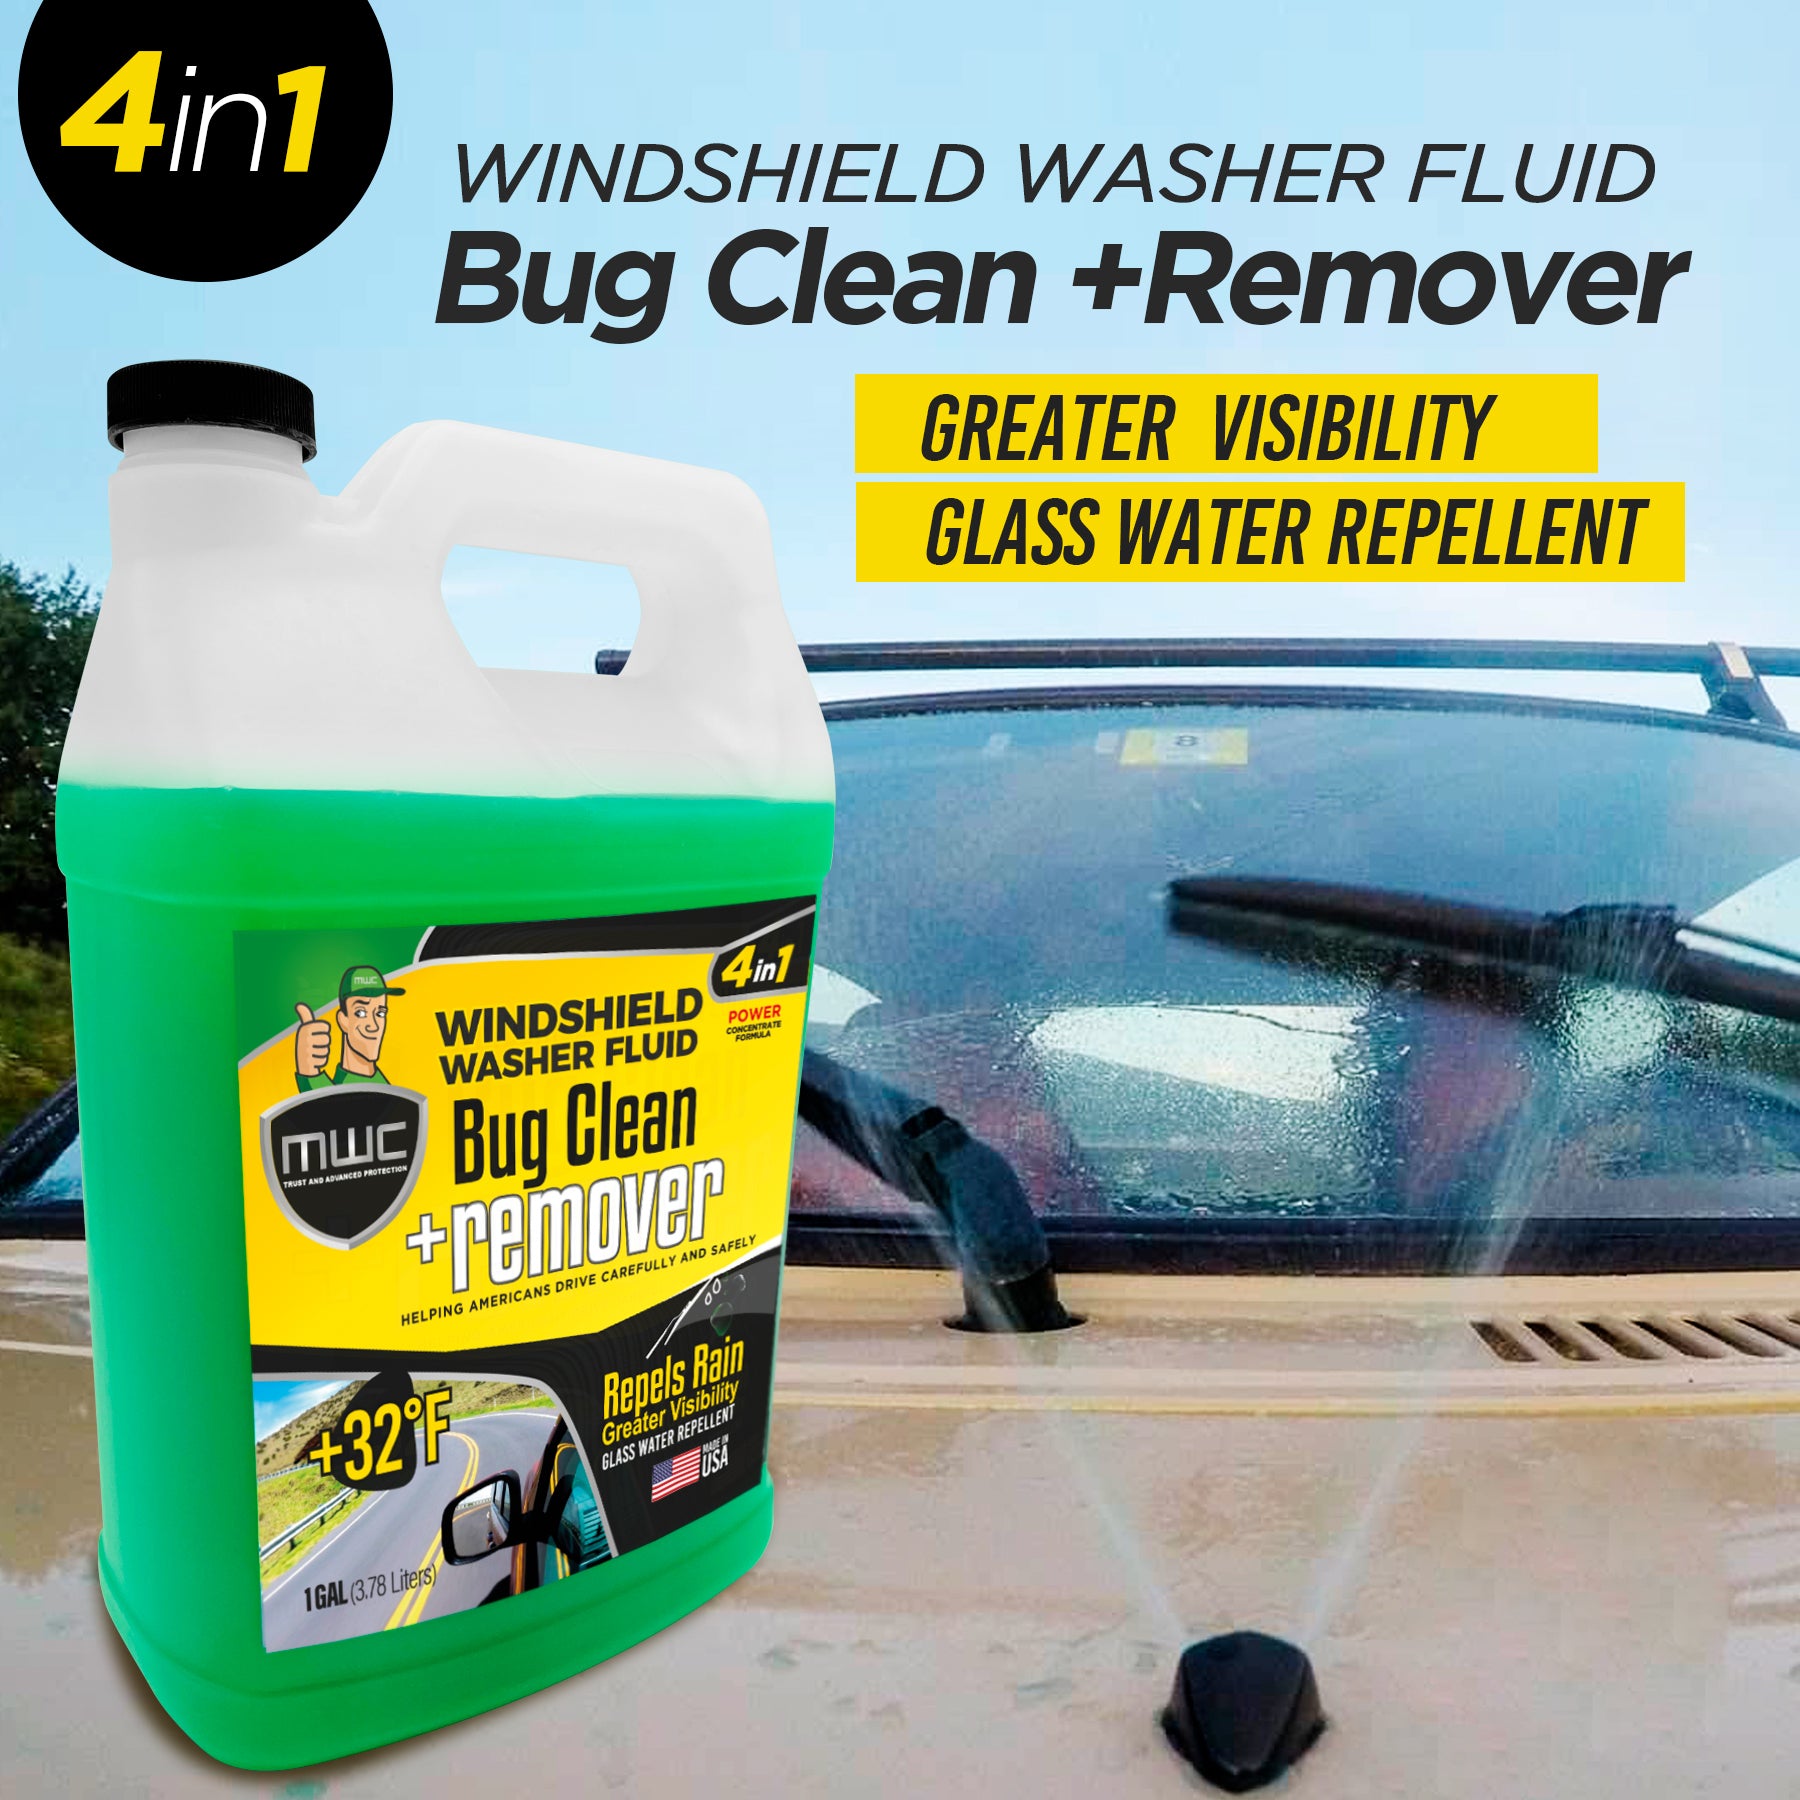 MWC Windshield Washer Fluid, Ready to Use, Removes dirt, Safe for the  environment, Removes grime, Streak Free Glass Cleaner,+ 32°F, 1 Gallon  (3.78